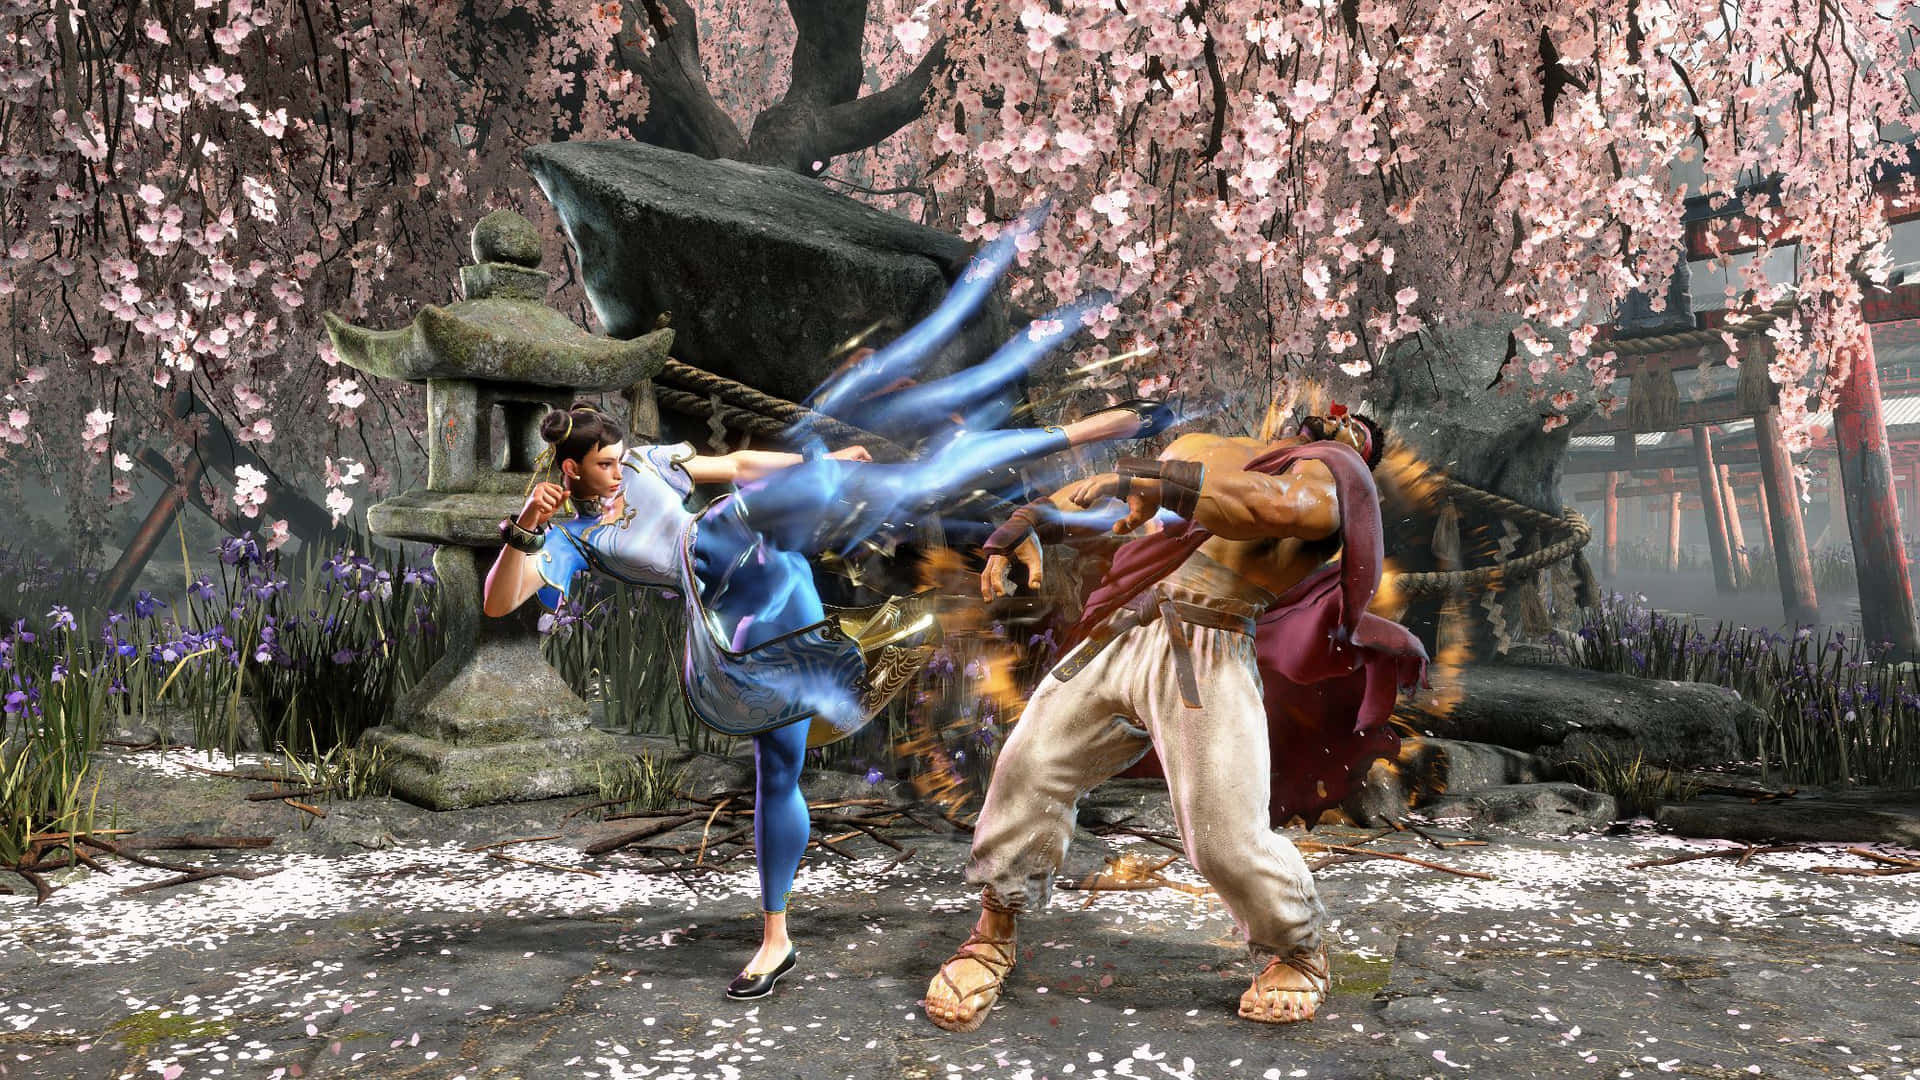 The intense action of Street Fighter, a classic fighting game